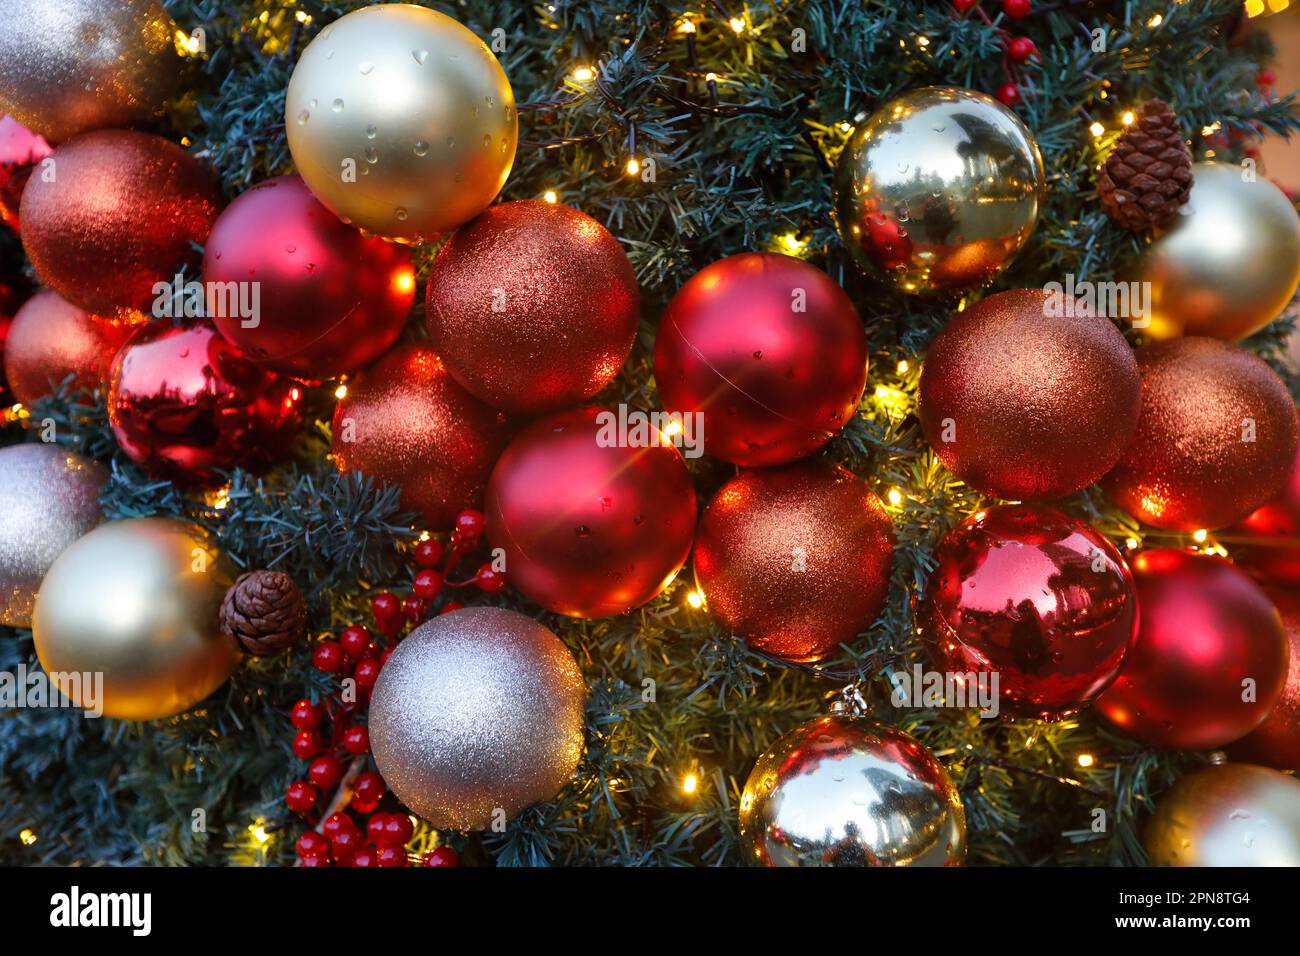 Selection of red and yellow Christmas balls for tree decoration.  Singapore. Stock Photo